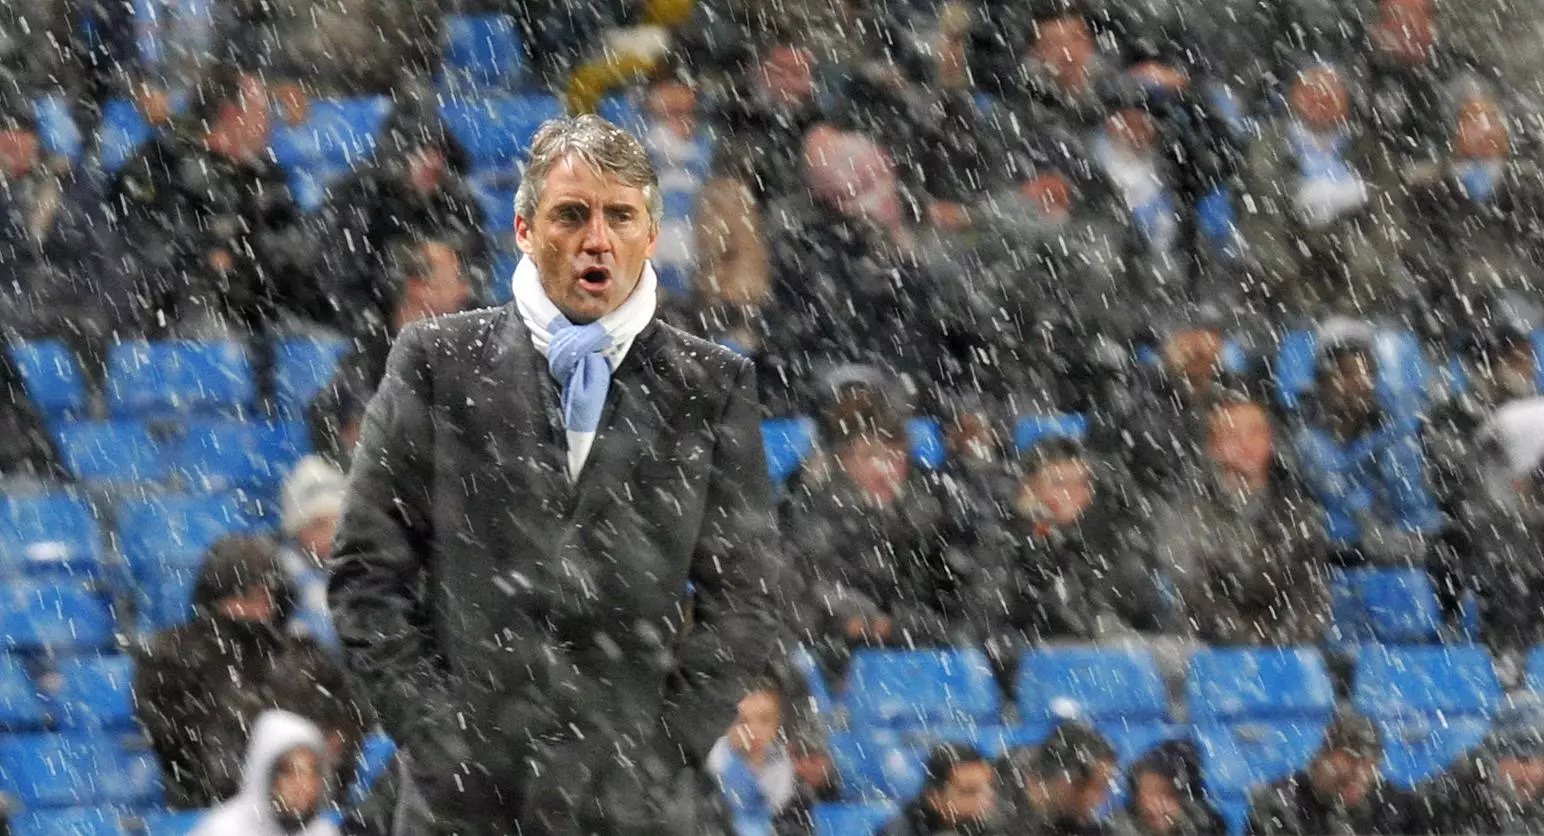 Leicester City Approach Roberto Mancini About Taking Over From Claudio Ranieri